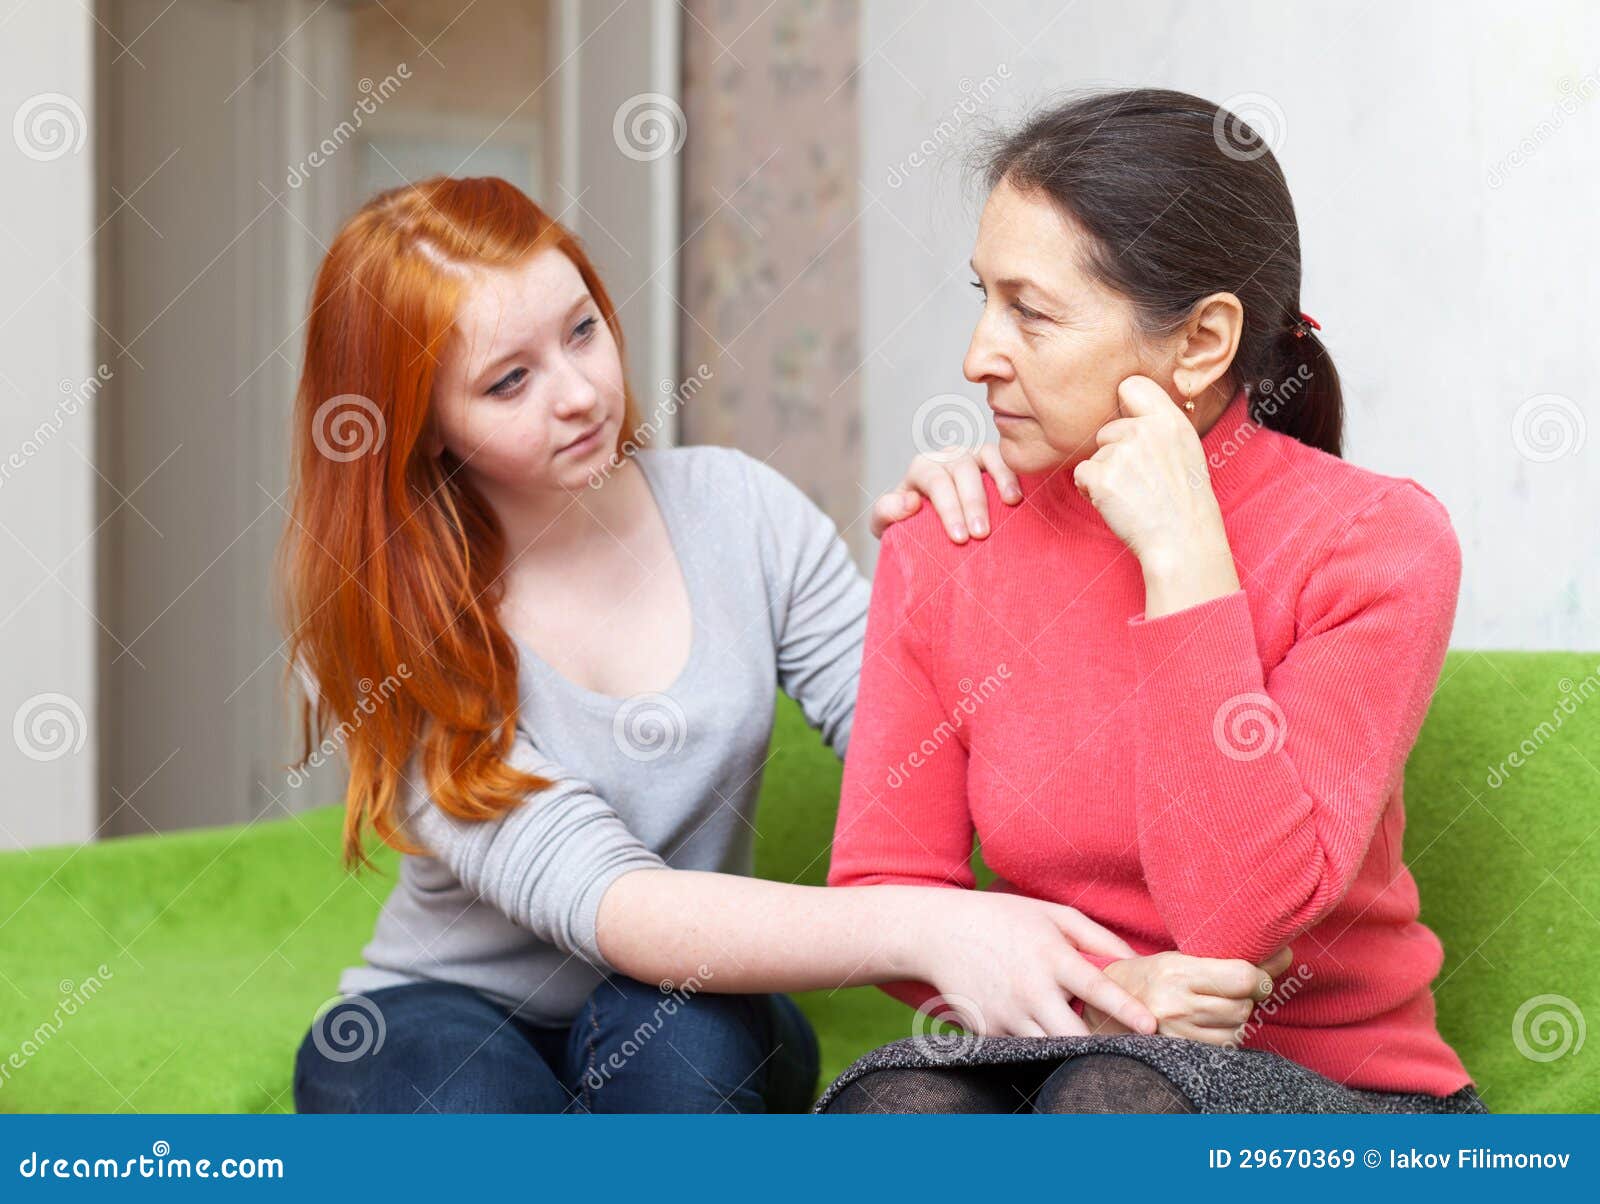 teen girl tries reconcile with her mother